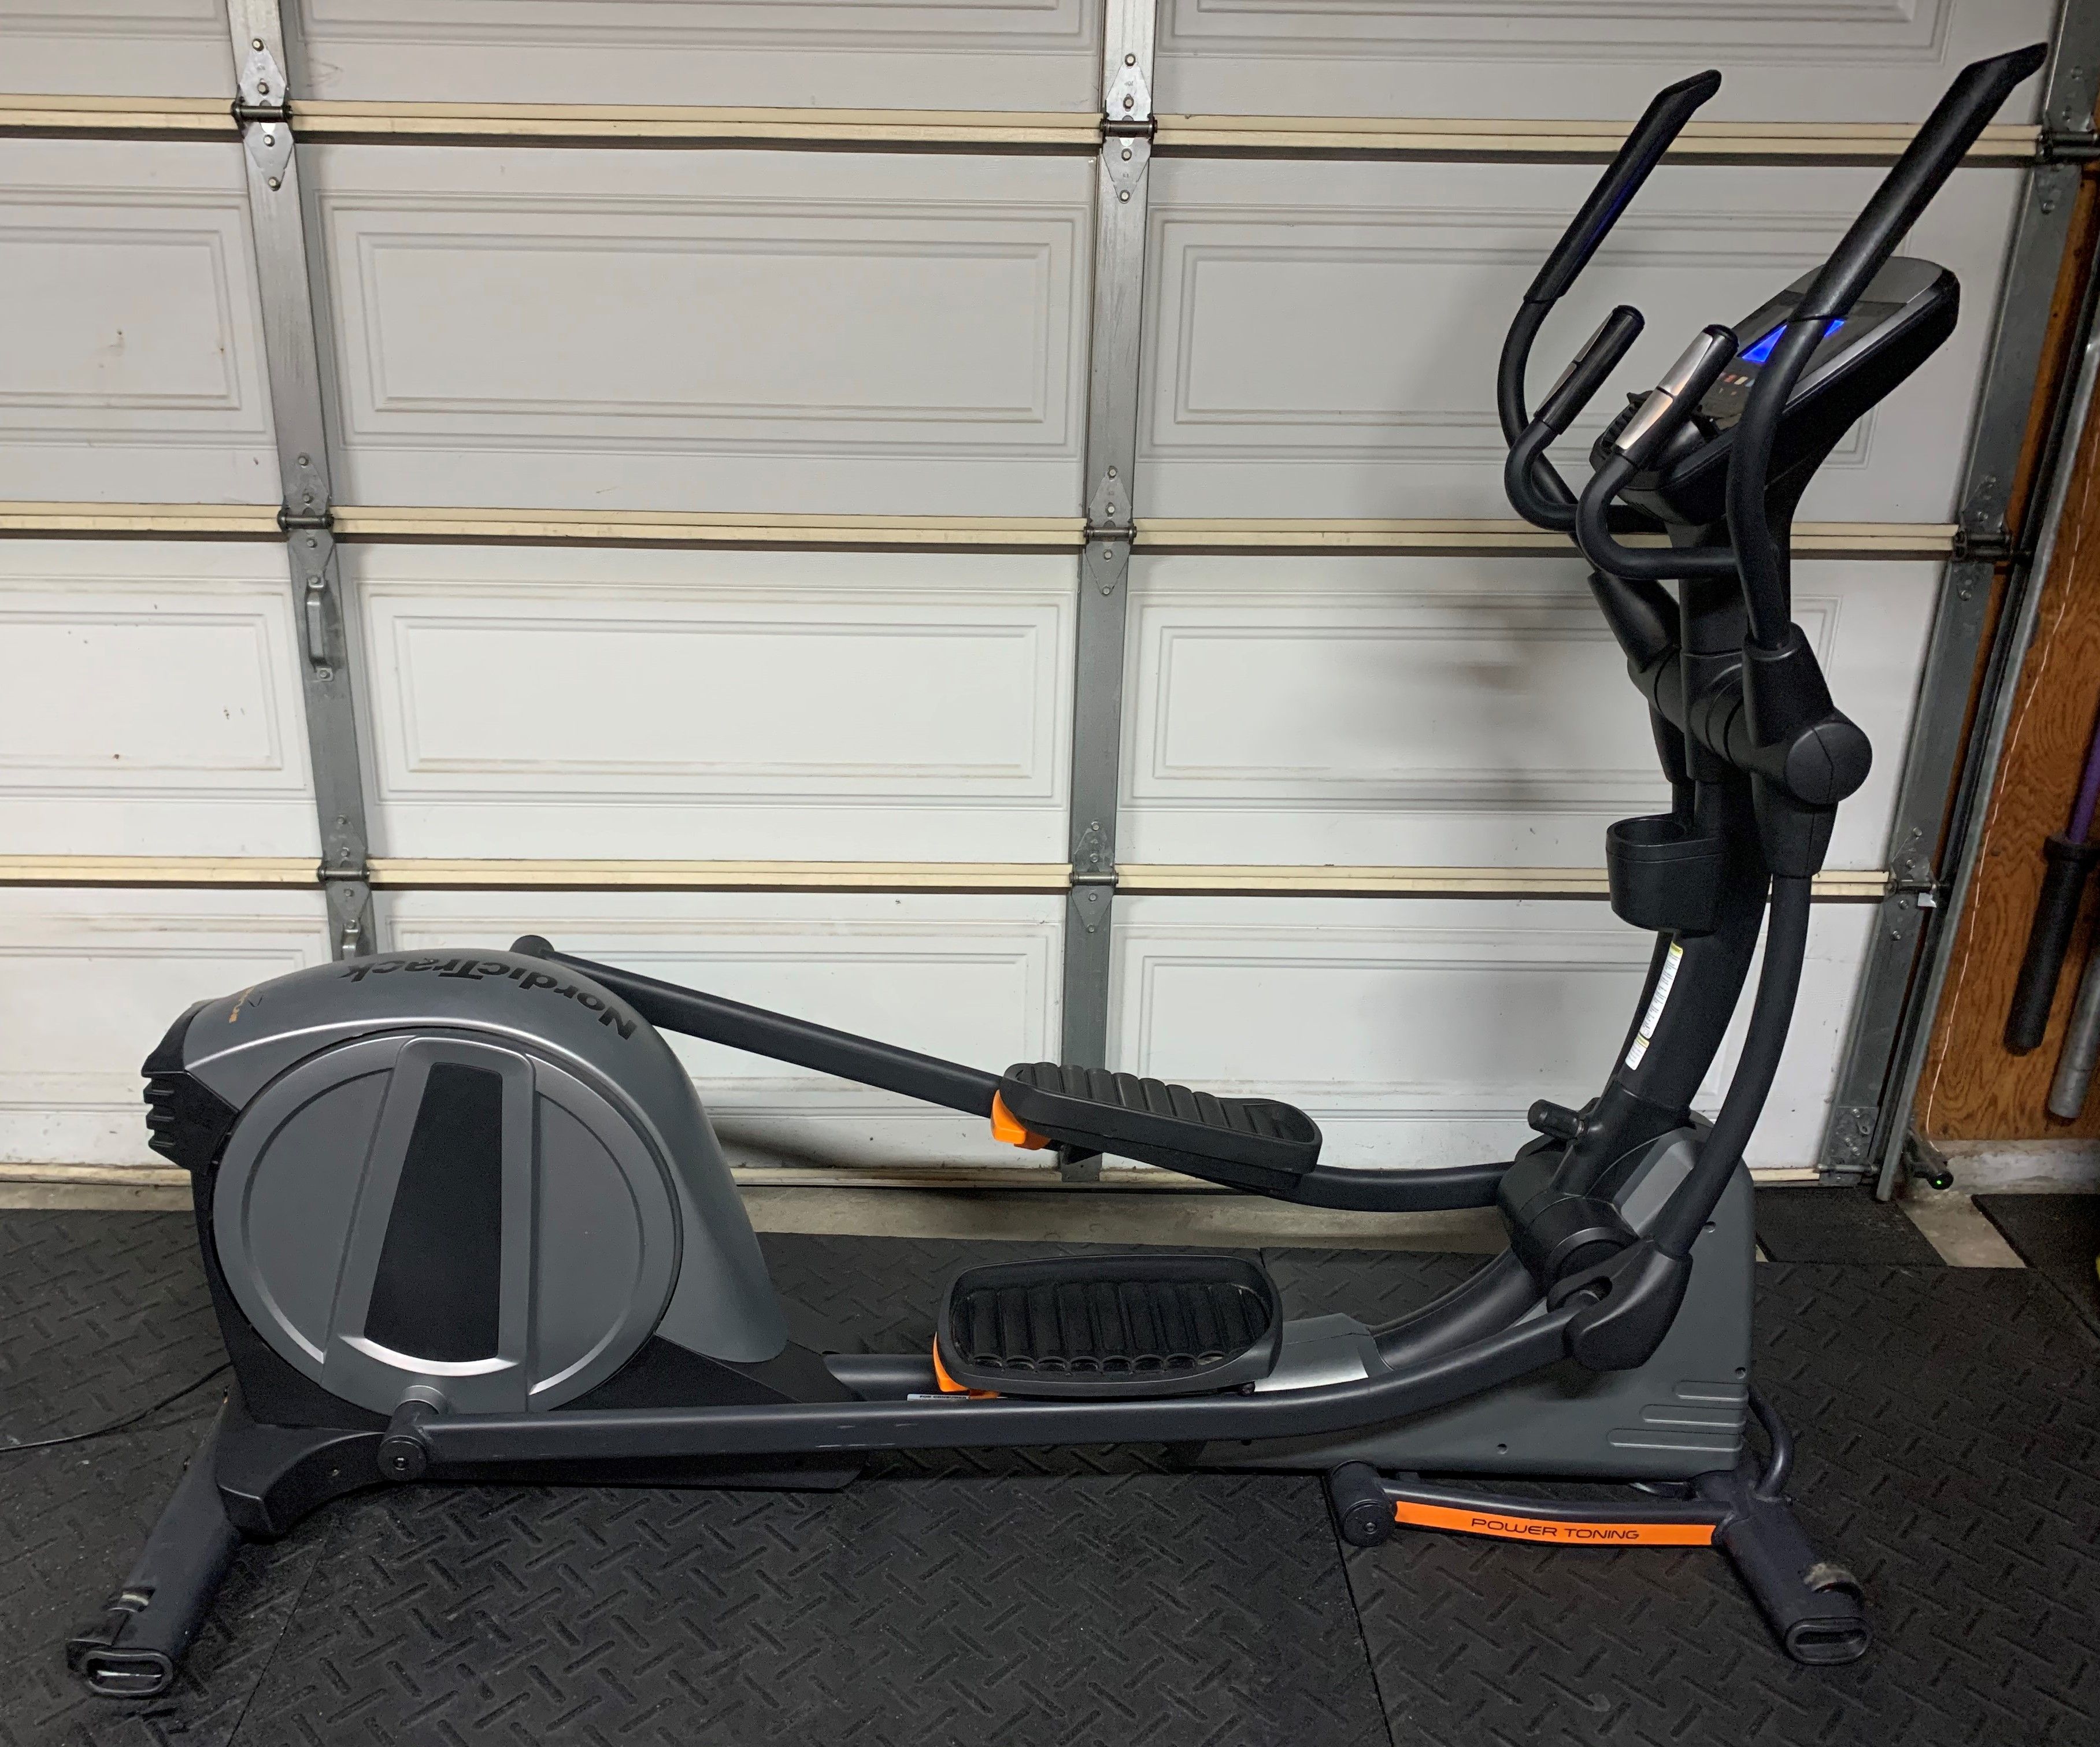 NordicTrack E7.7 Elliptical Cross-Trainer Exercise Workout Machine Cardio Fitness Treadmill